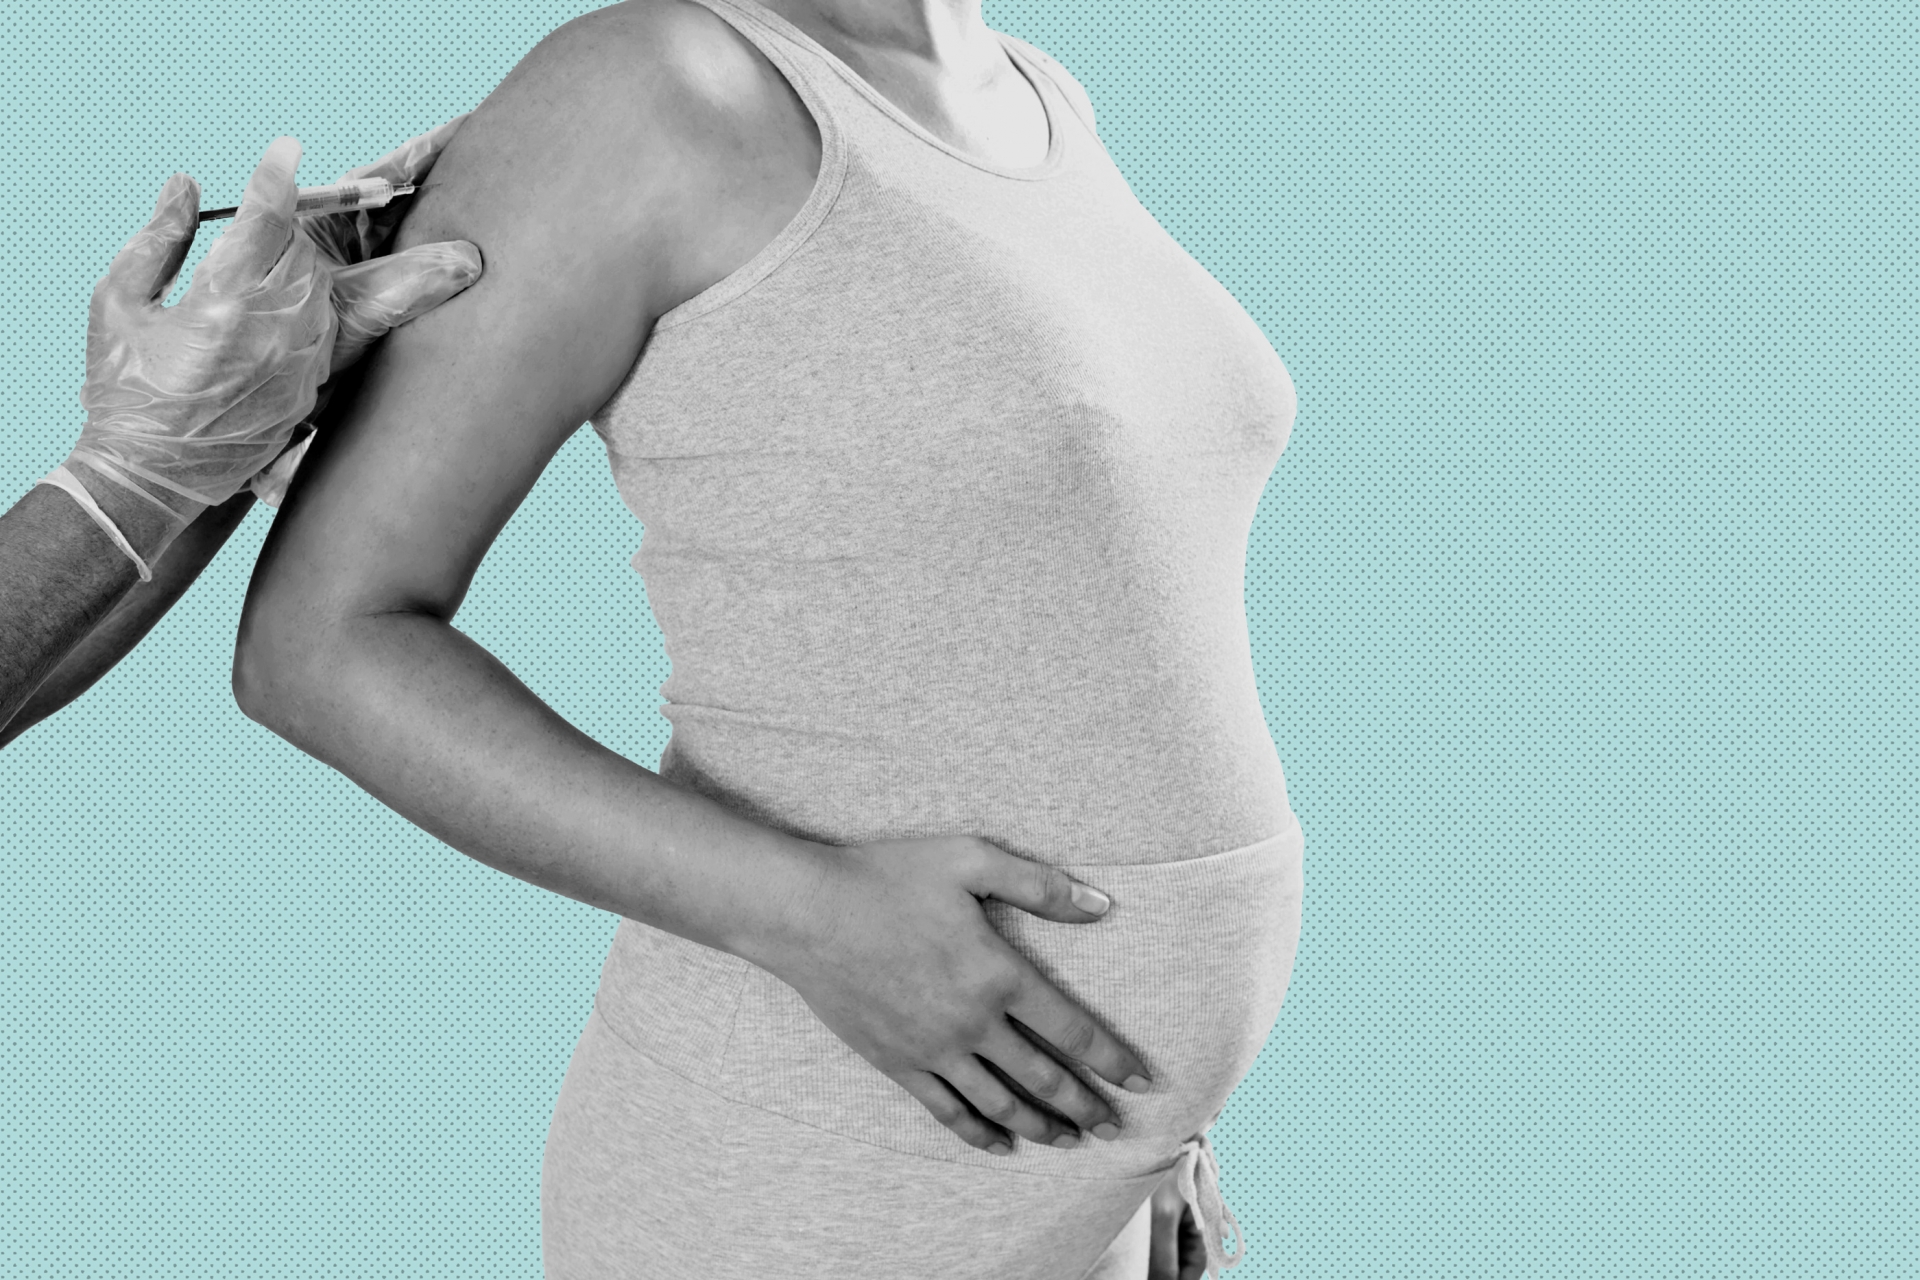 What are the needed vaccines for women before and during pregnancy?